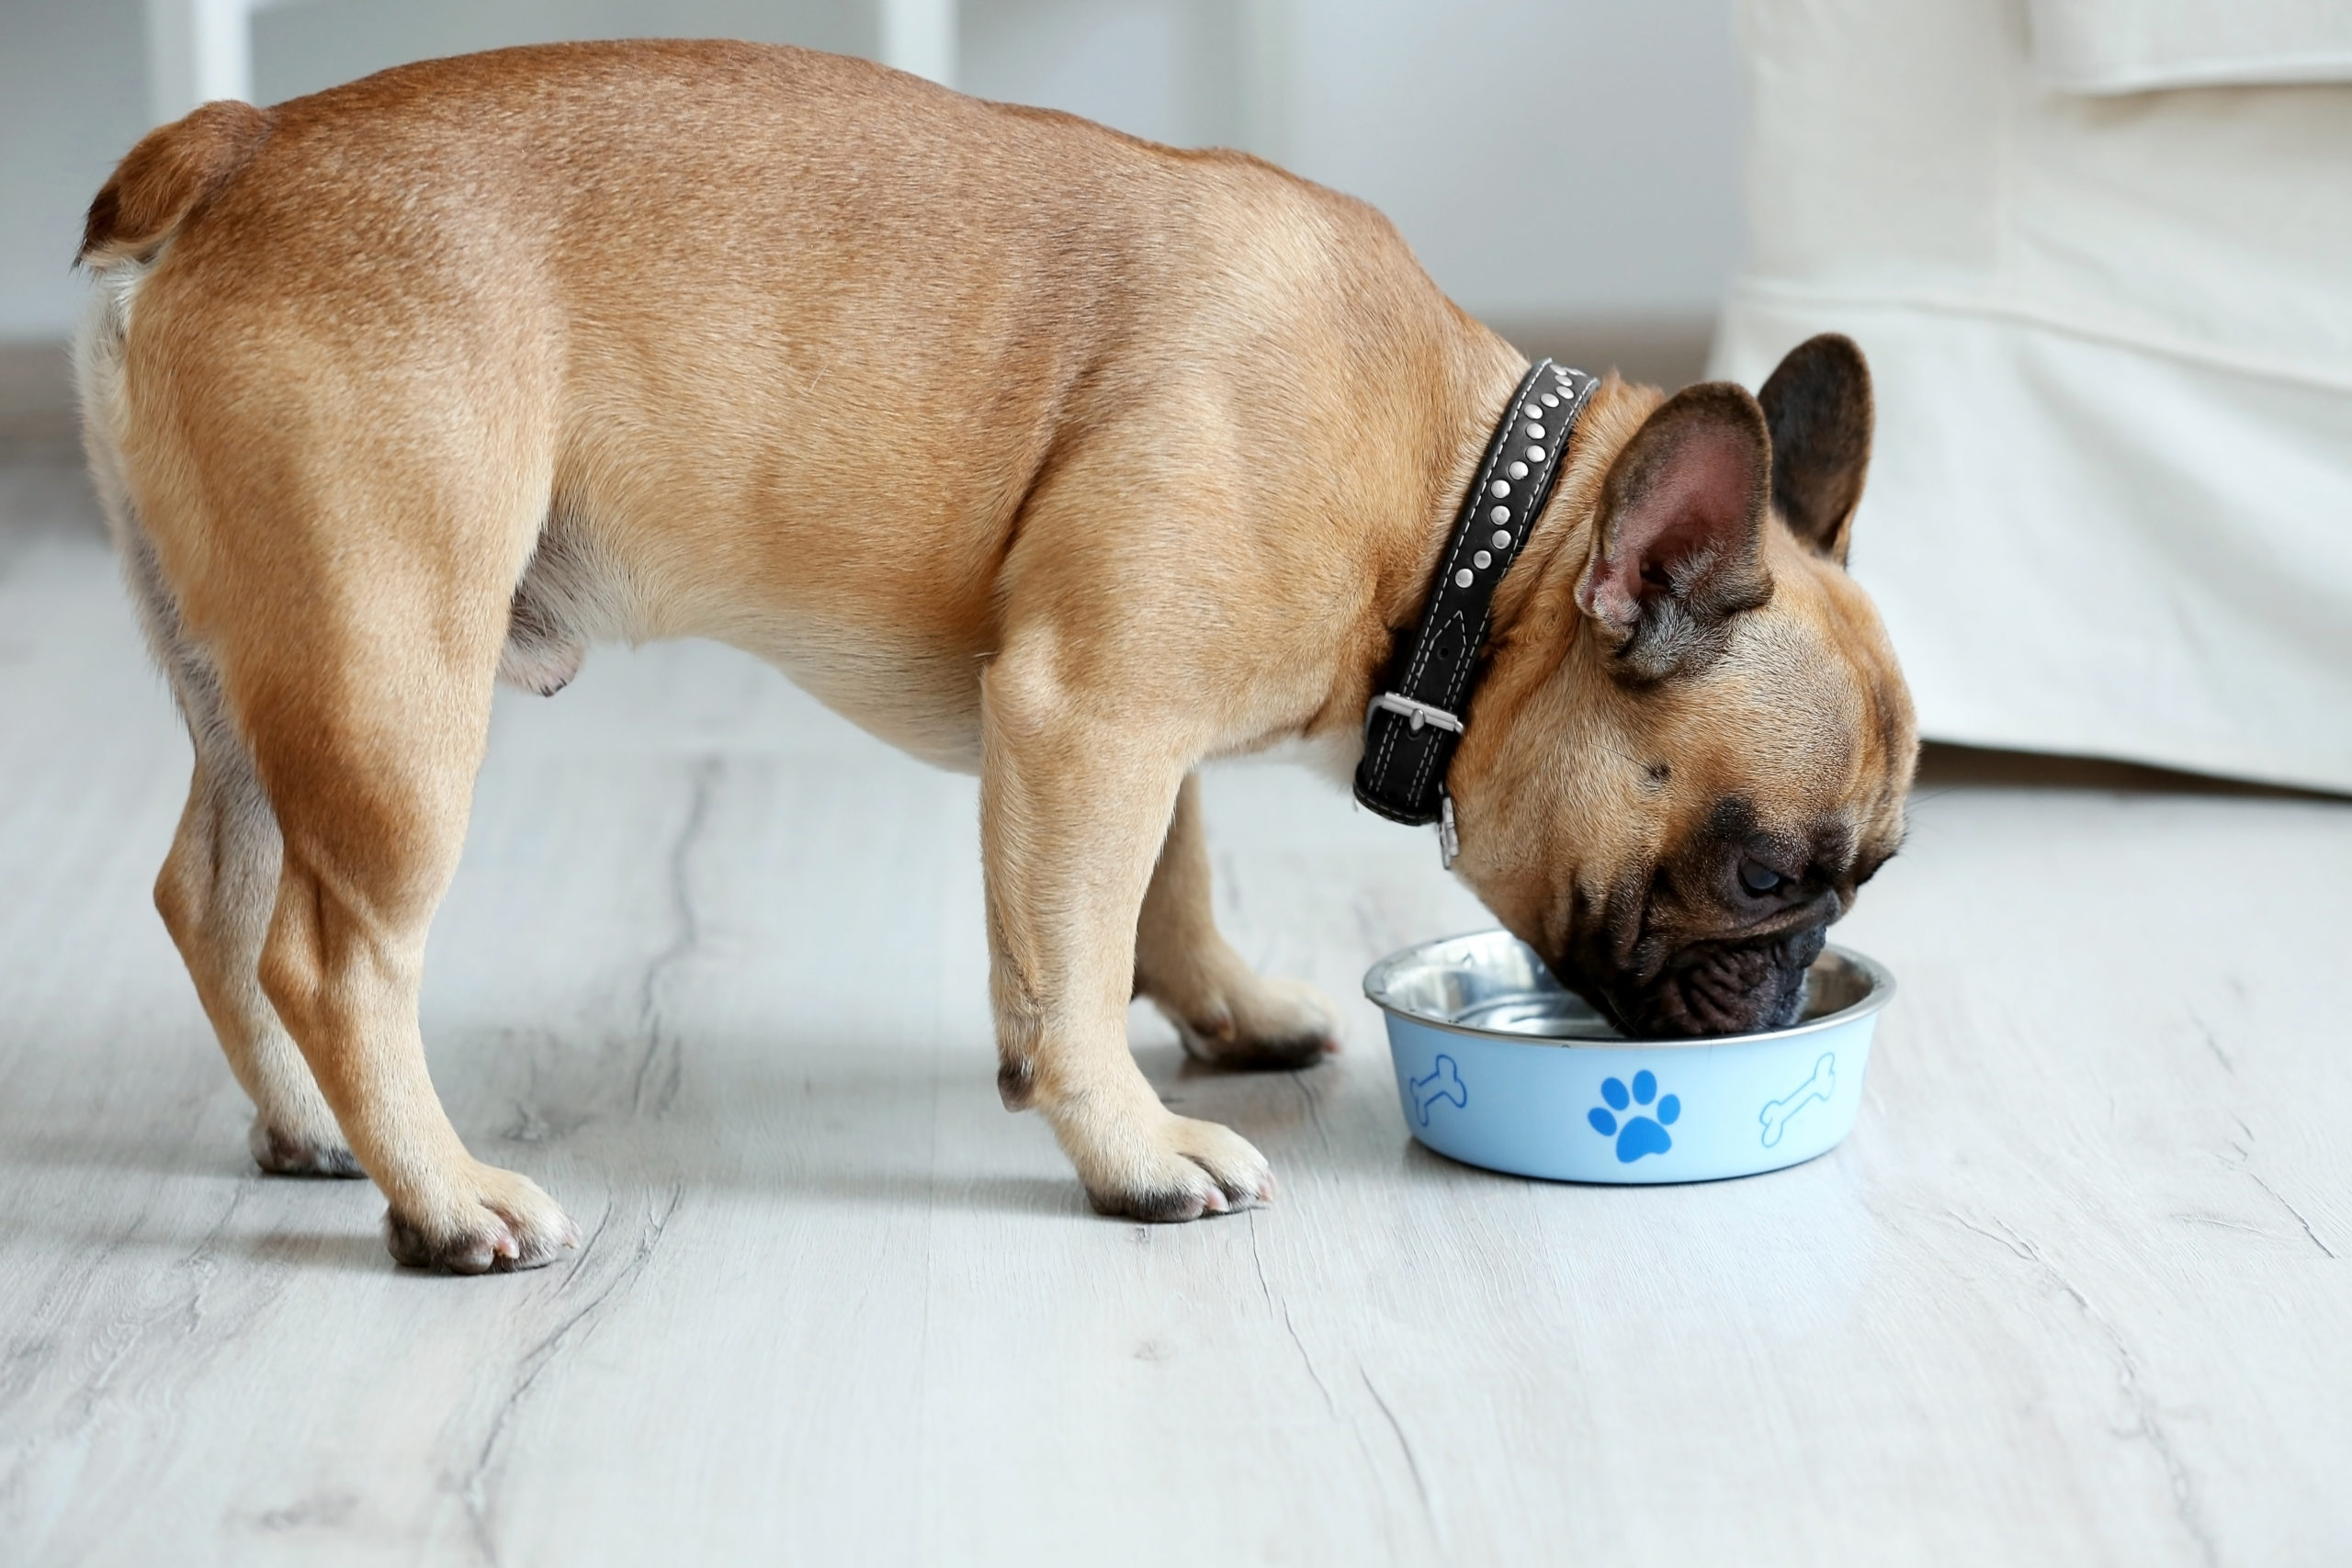 dog with short snout eating from dog food dish